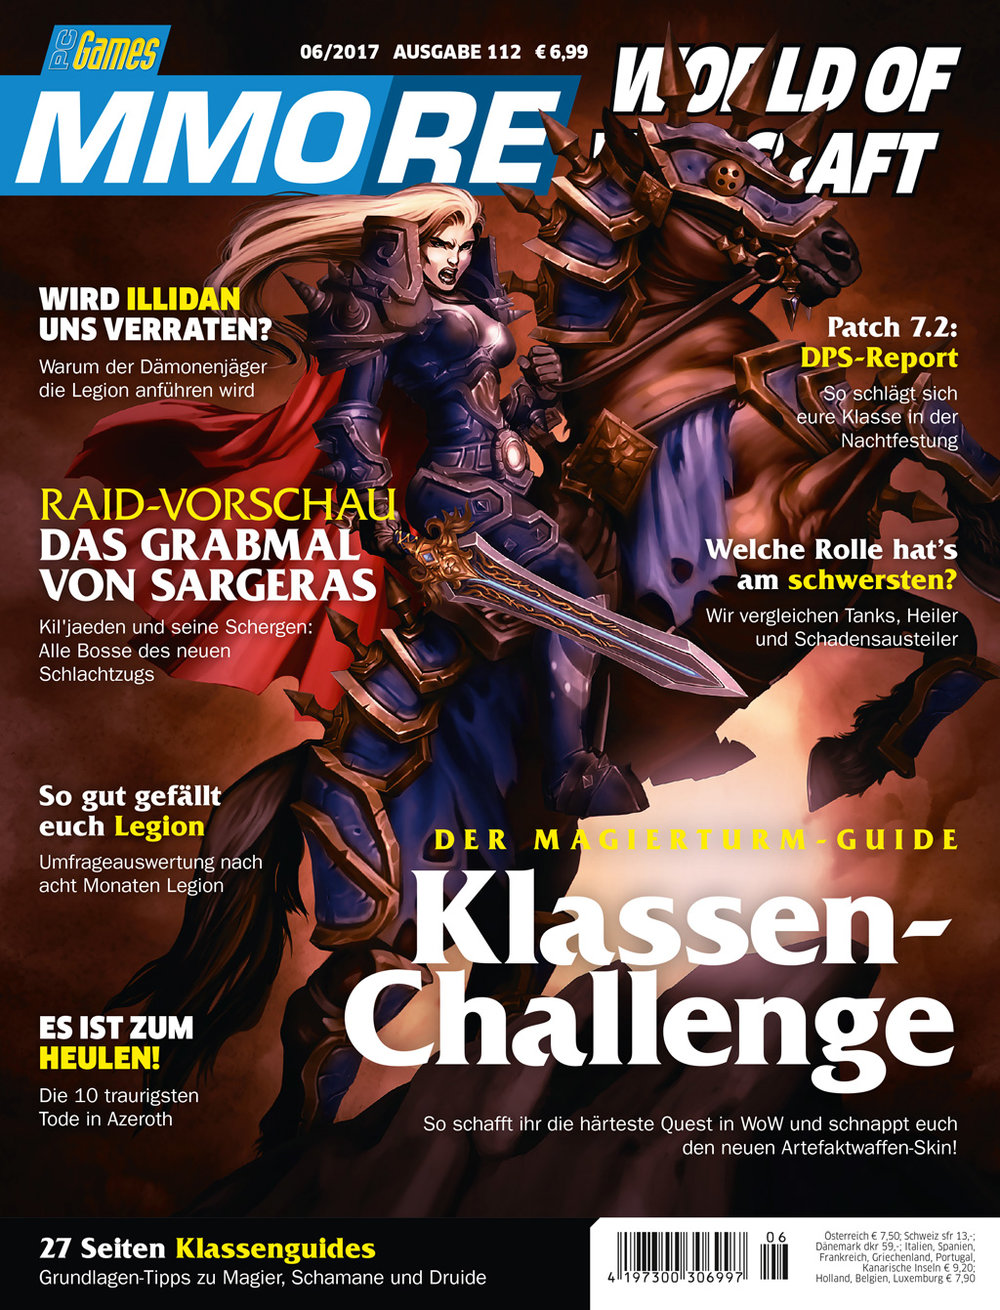 PC Games MMORE ePaper 06/2017